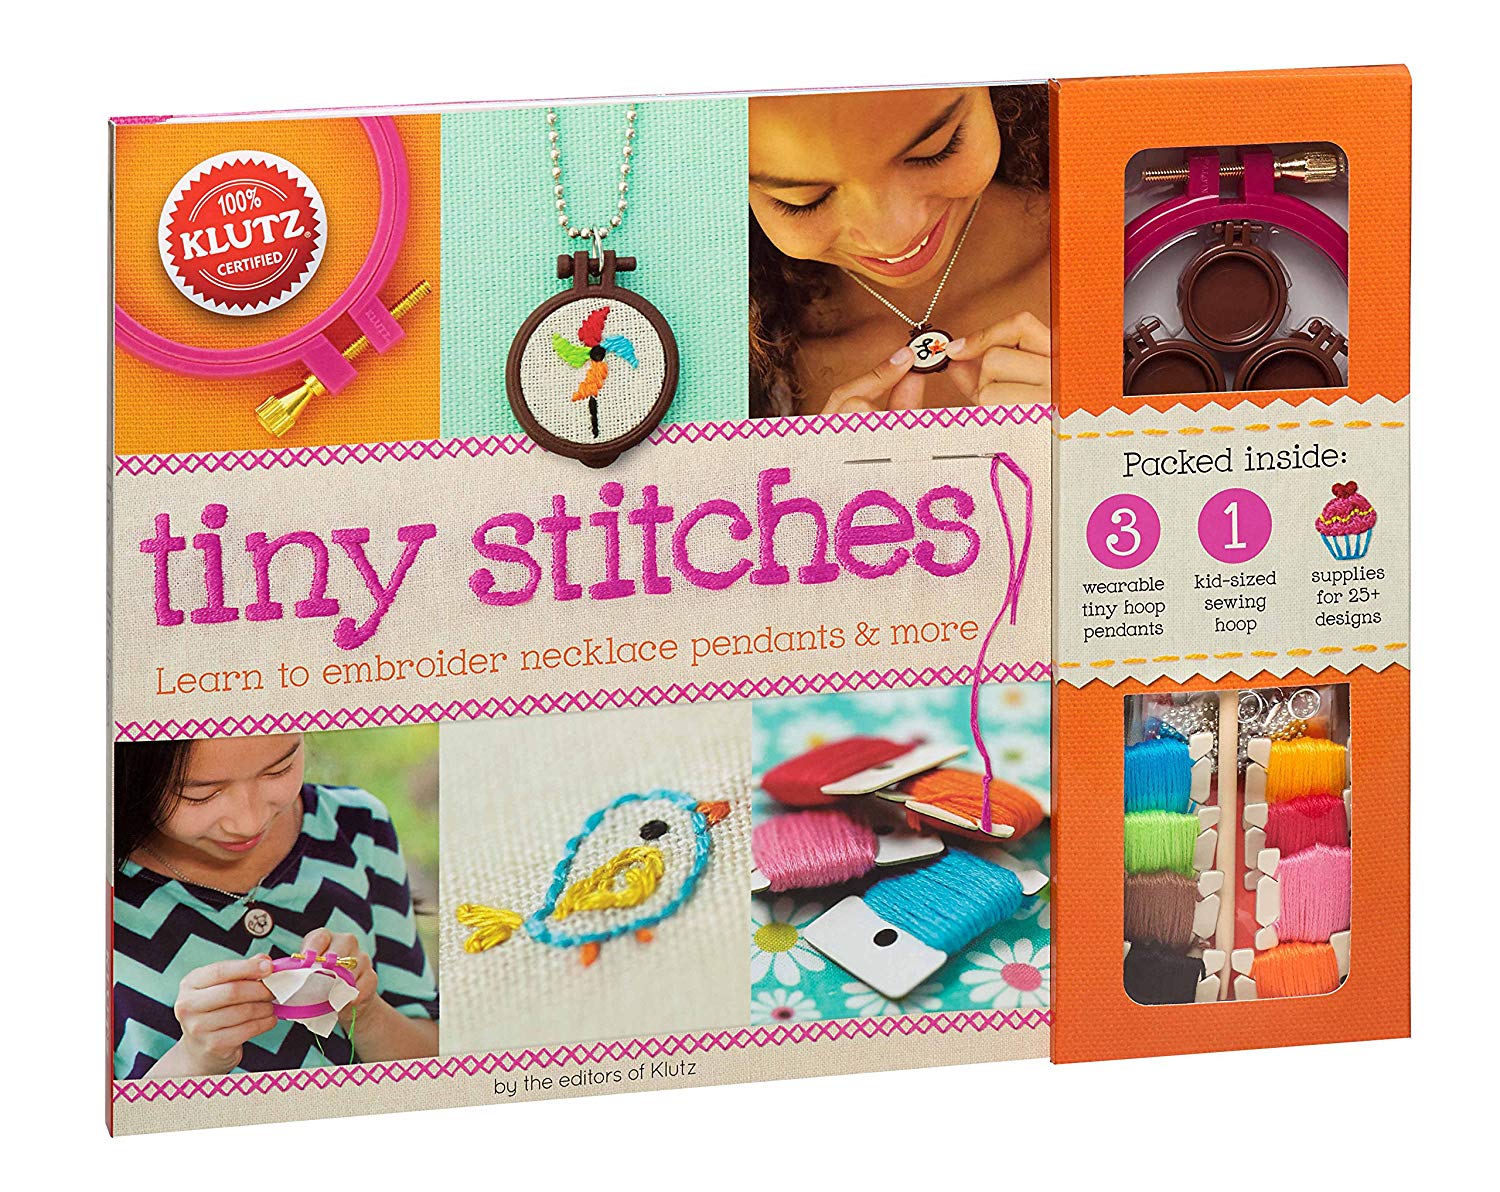 20+ cutest sewing kits for kids - Swoodson Says